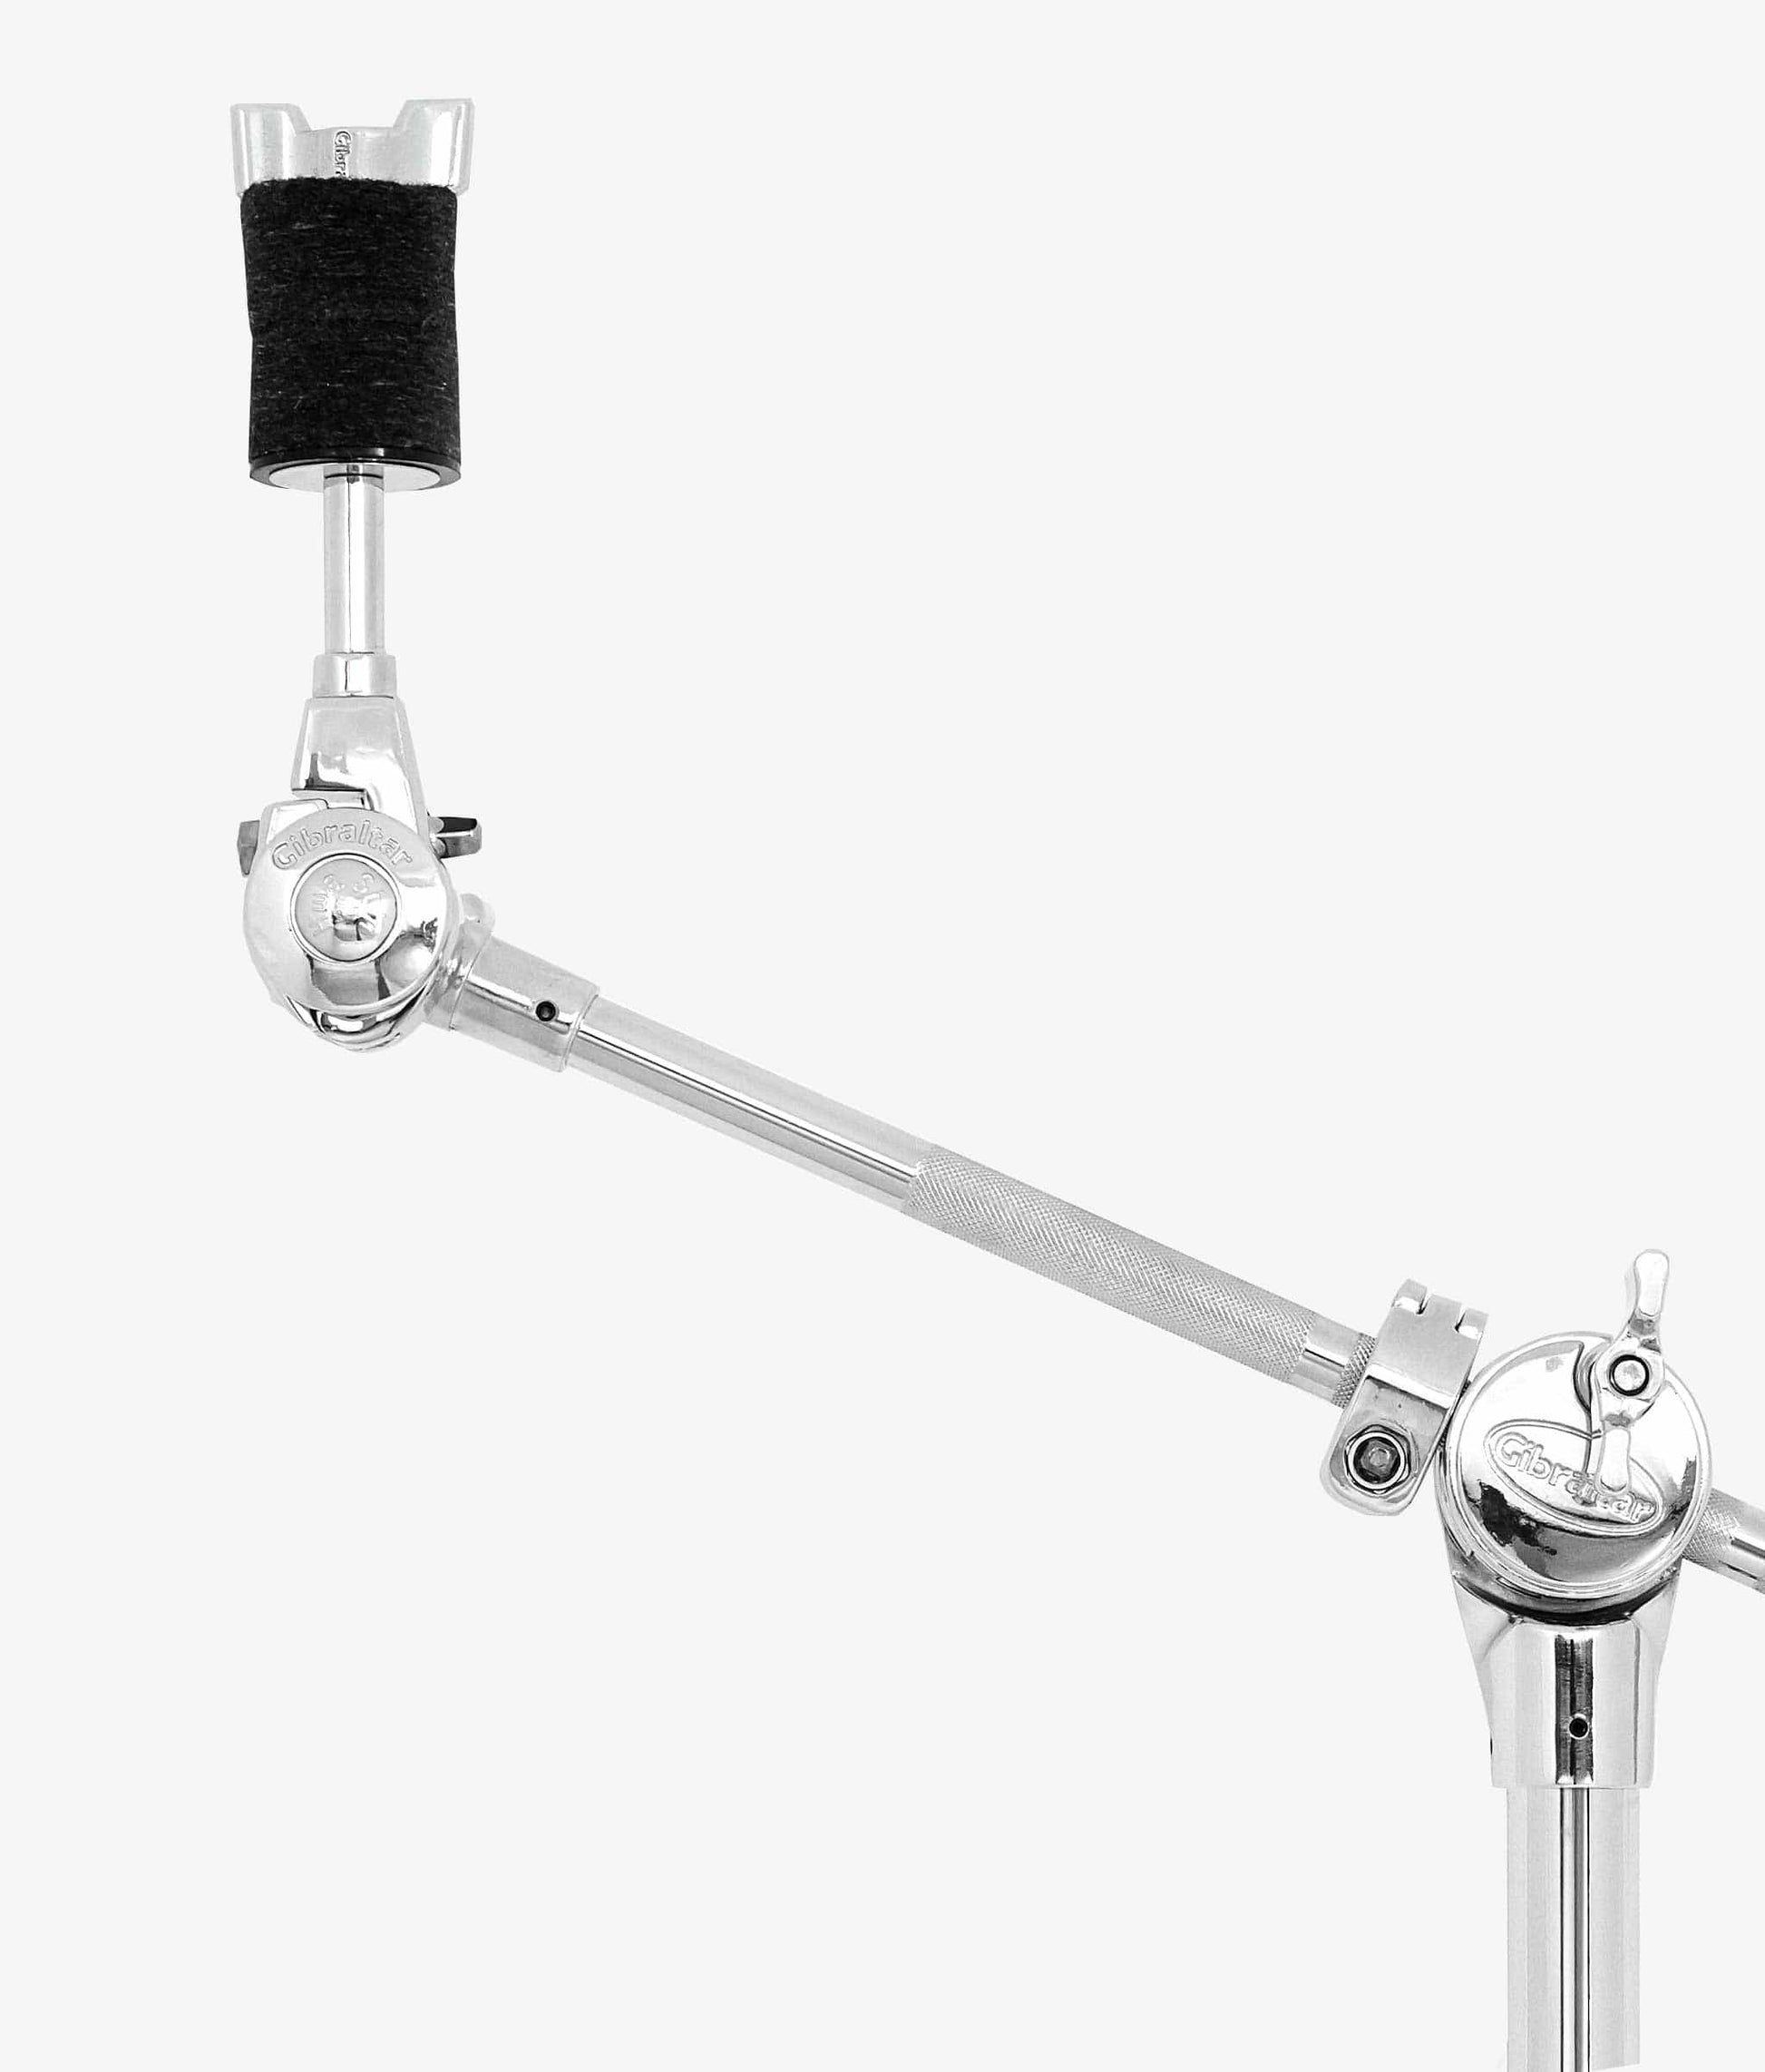  Gibraltar 6709NL No Leg Cymbal Stand cymbal boom stand